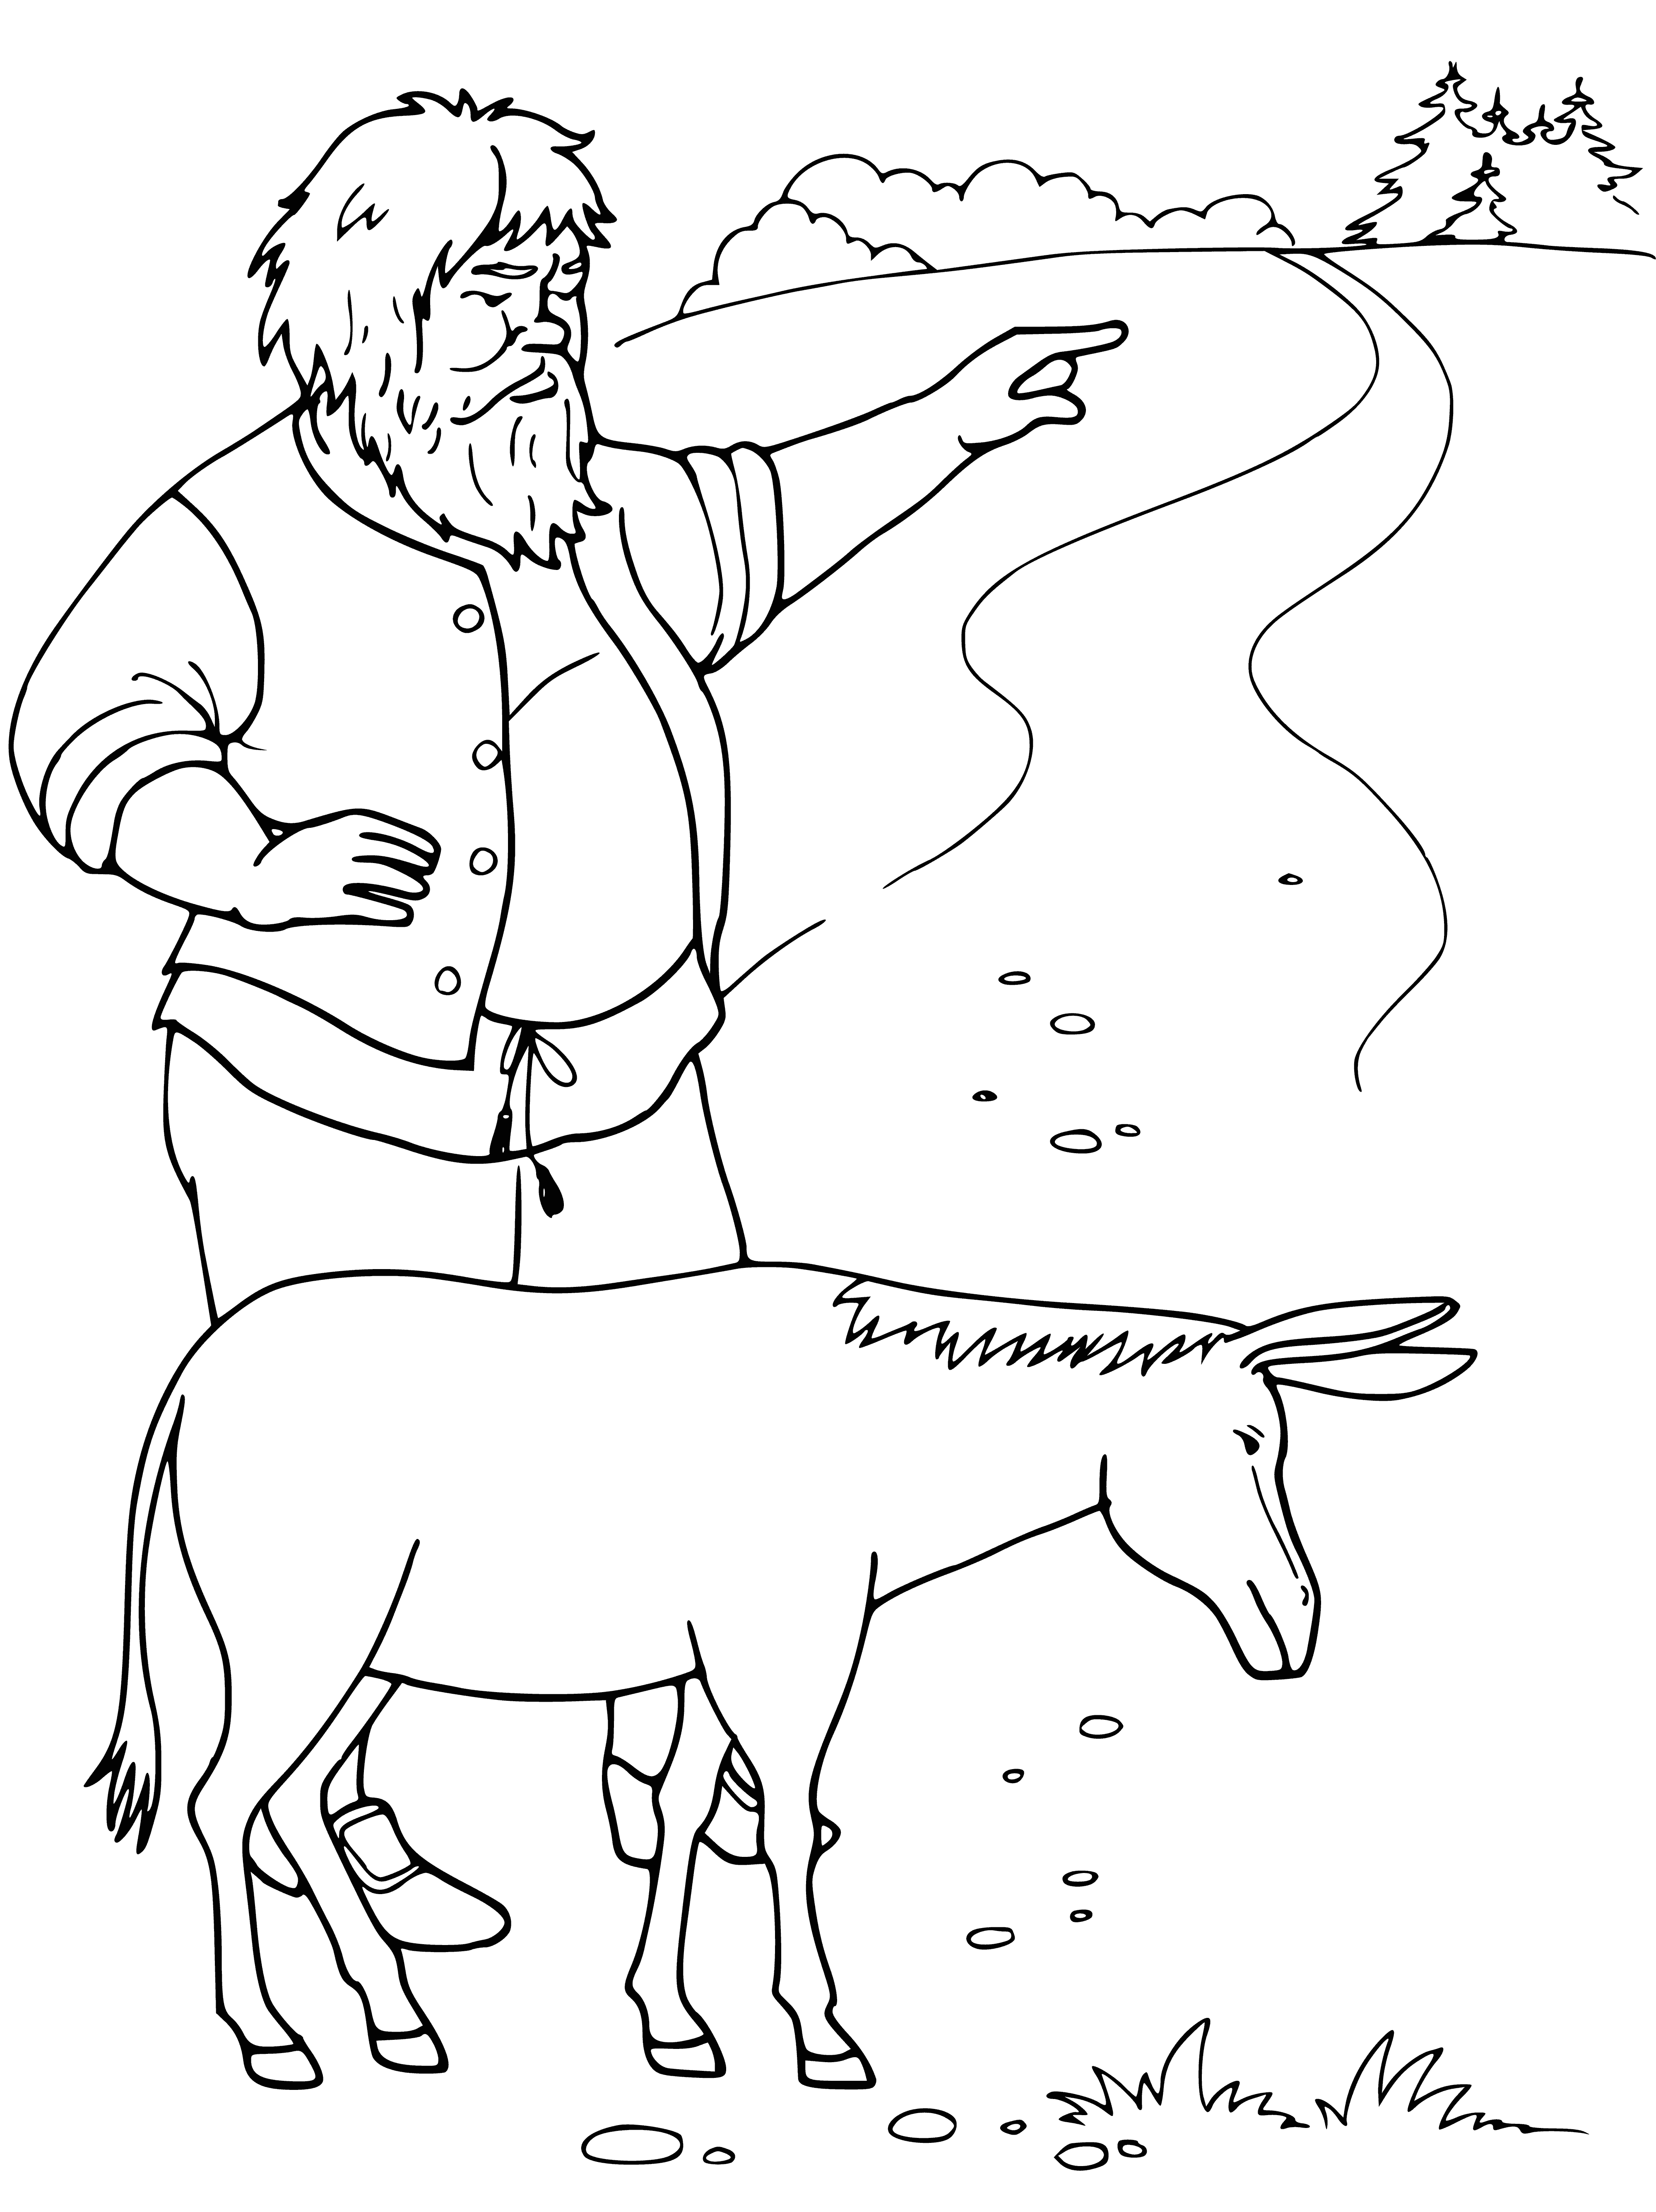 A donkey coloring page